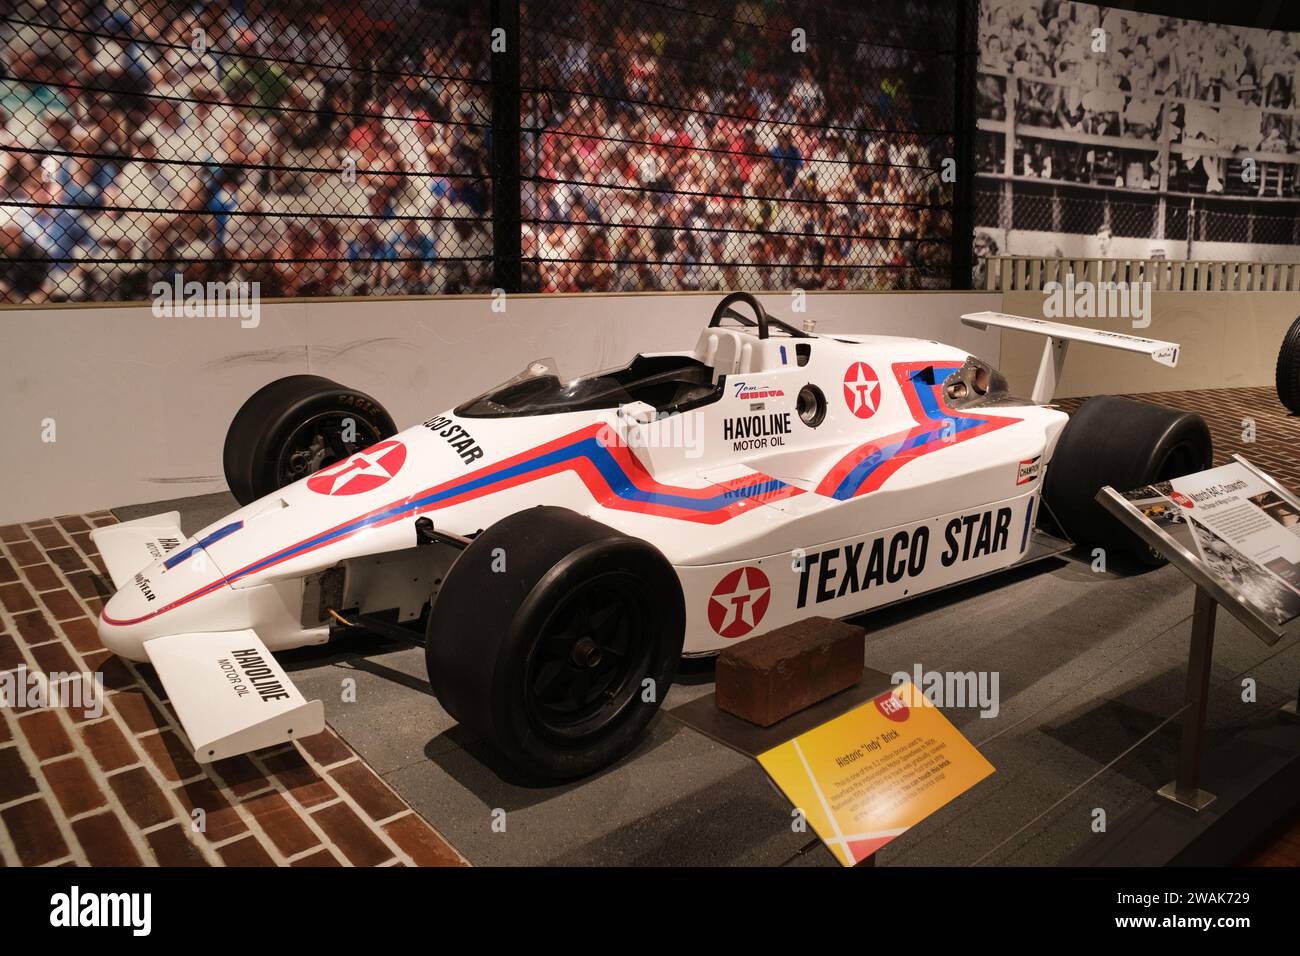 1984. März 84C-Cosworth Indy Car im Henry Ford Museum of American Innovation, Dearborn Michigan USA Stockfoto